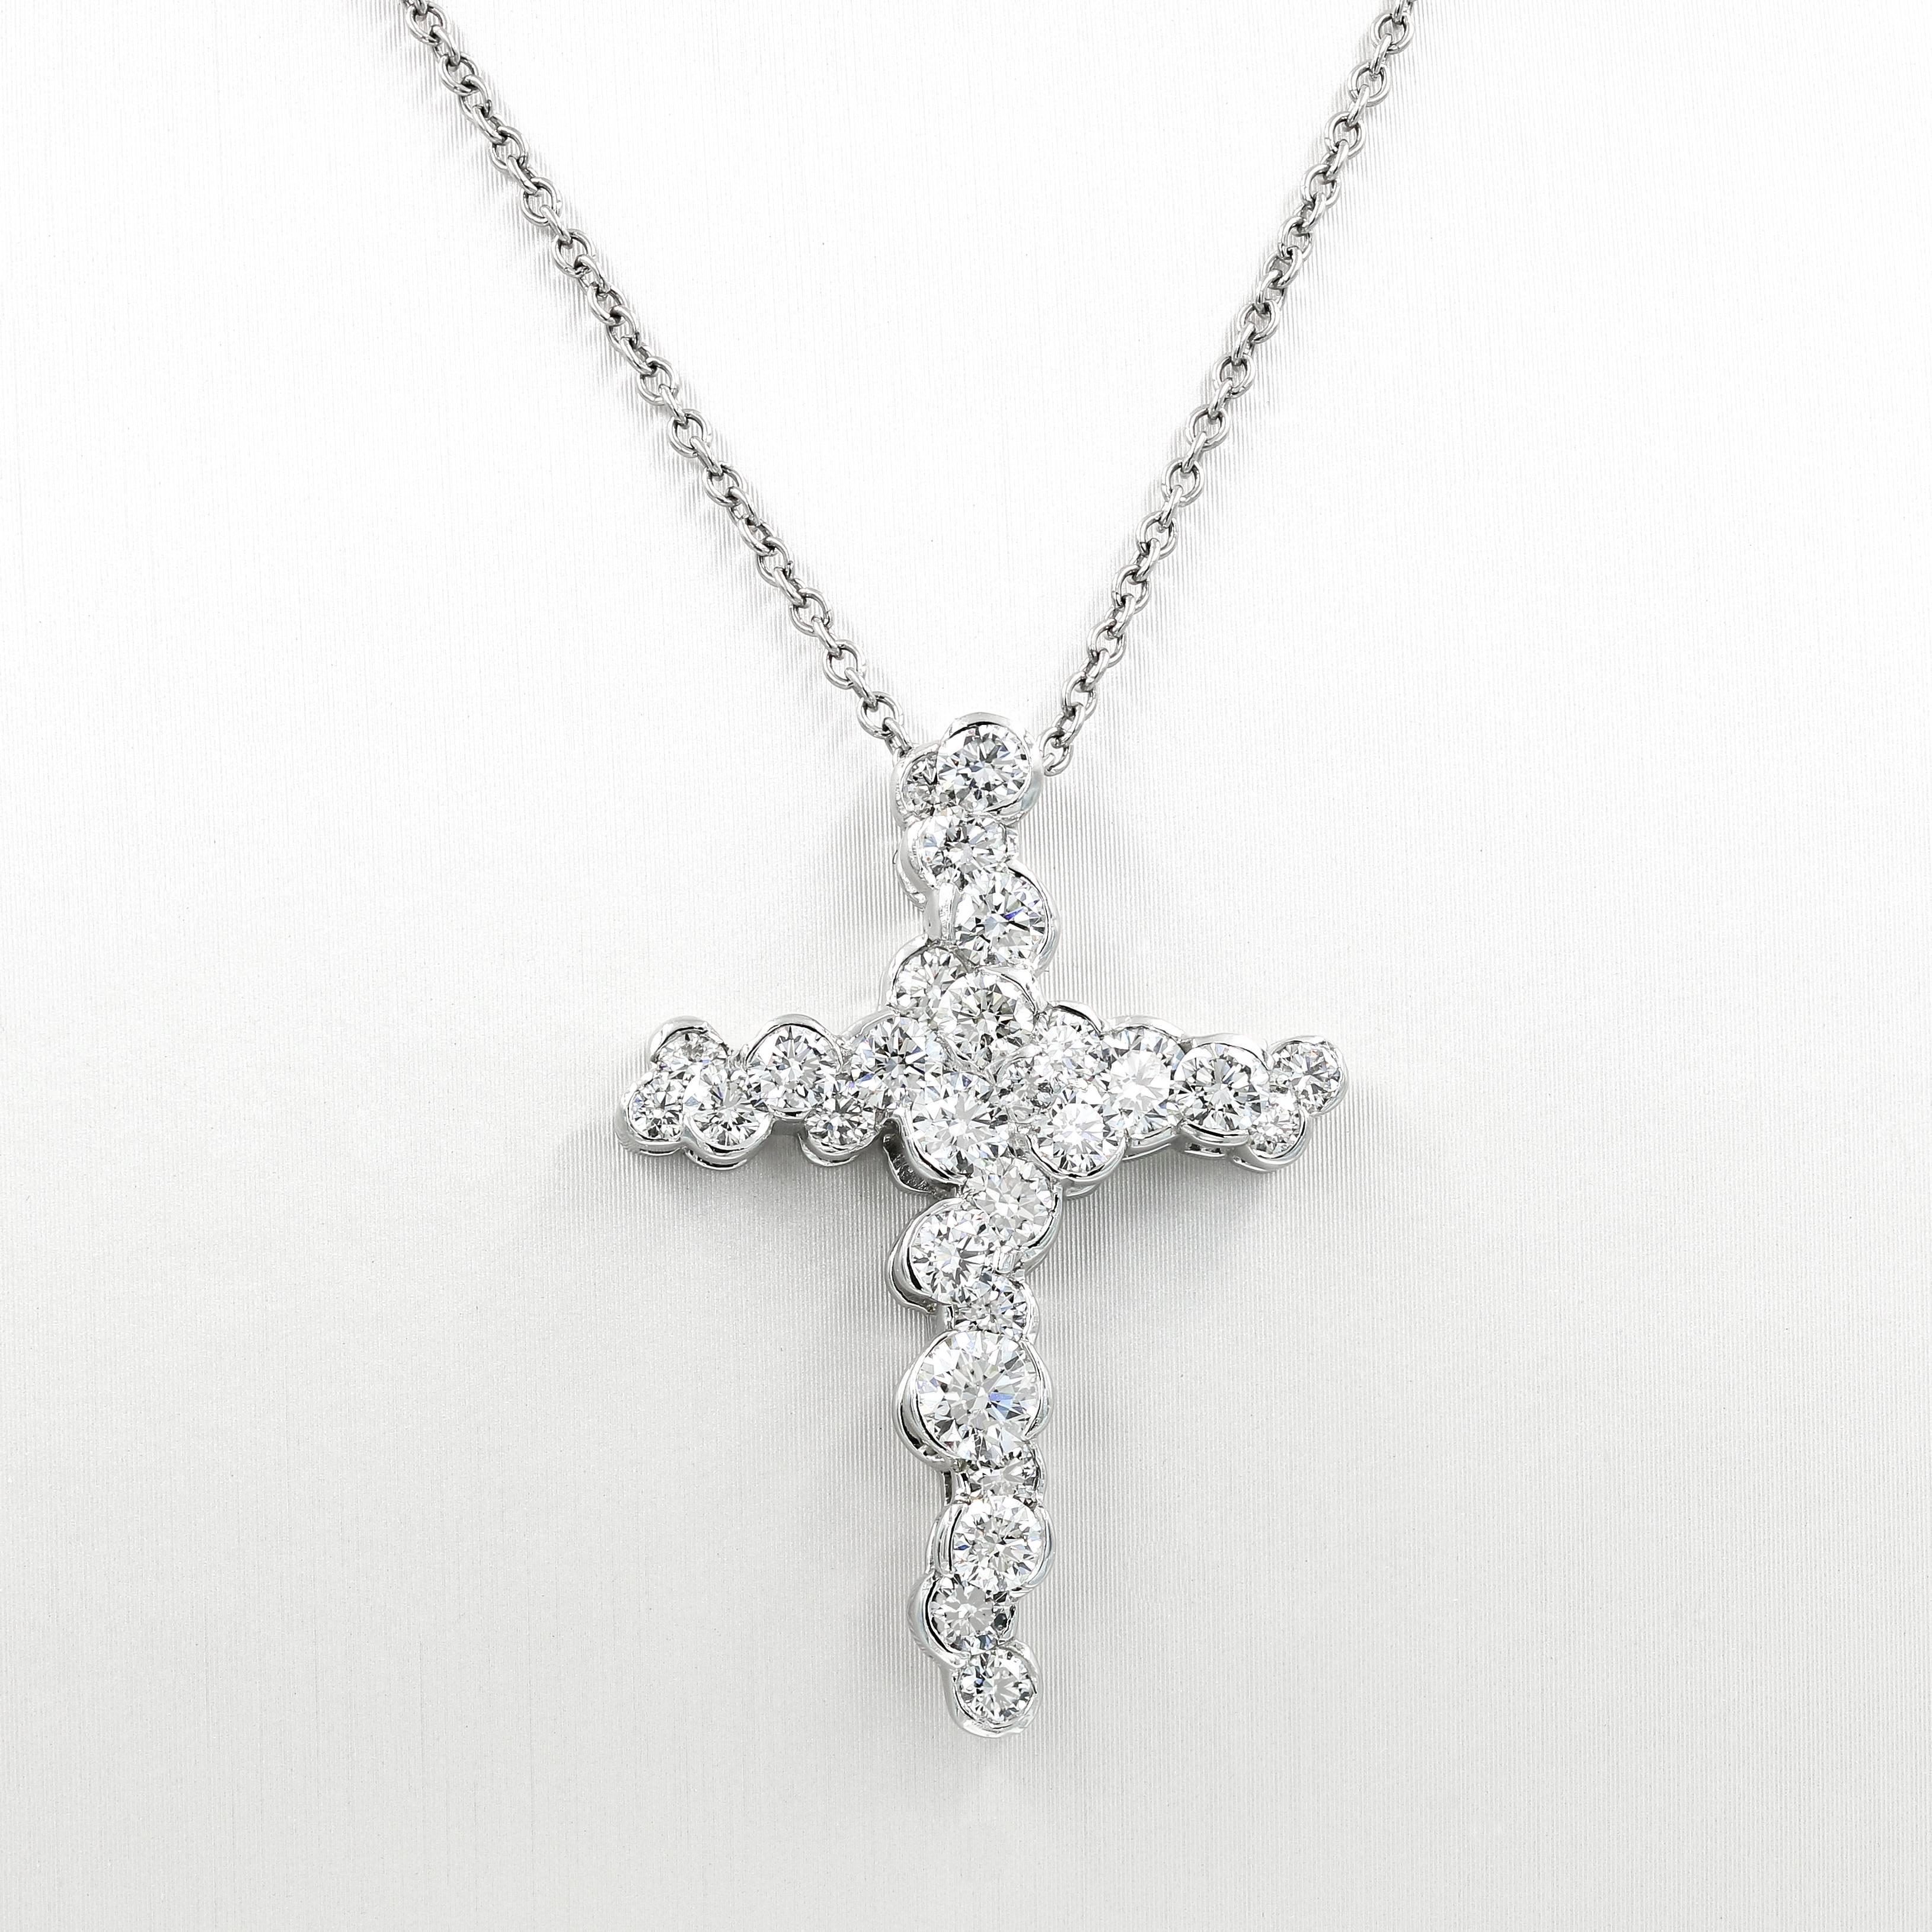 This creative custom crafted Lester Lampert large CumuLLus Collection® style necklace is set in platinum. It contains 28 ideal cut round diamonds= 3.31cts. t.w.  (the diamonds are G in color and VS clarity)

The piece is suspended from a fine